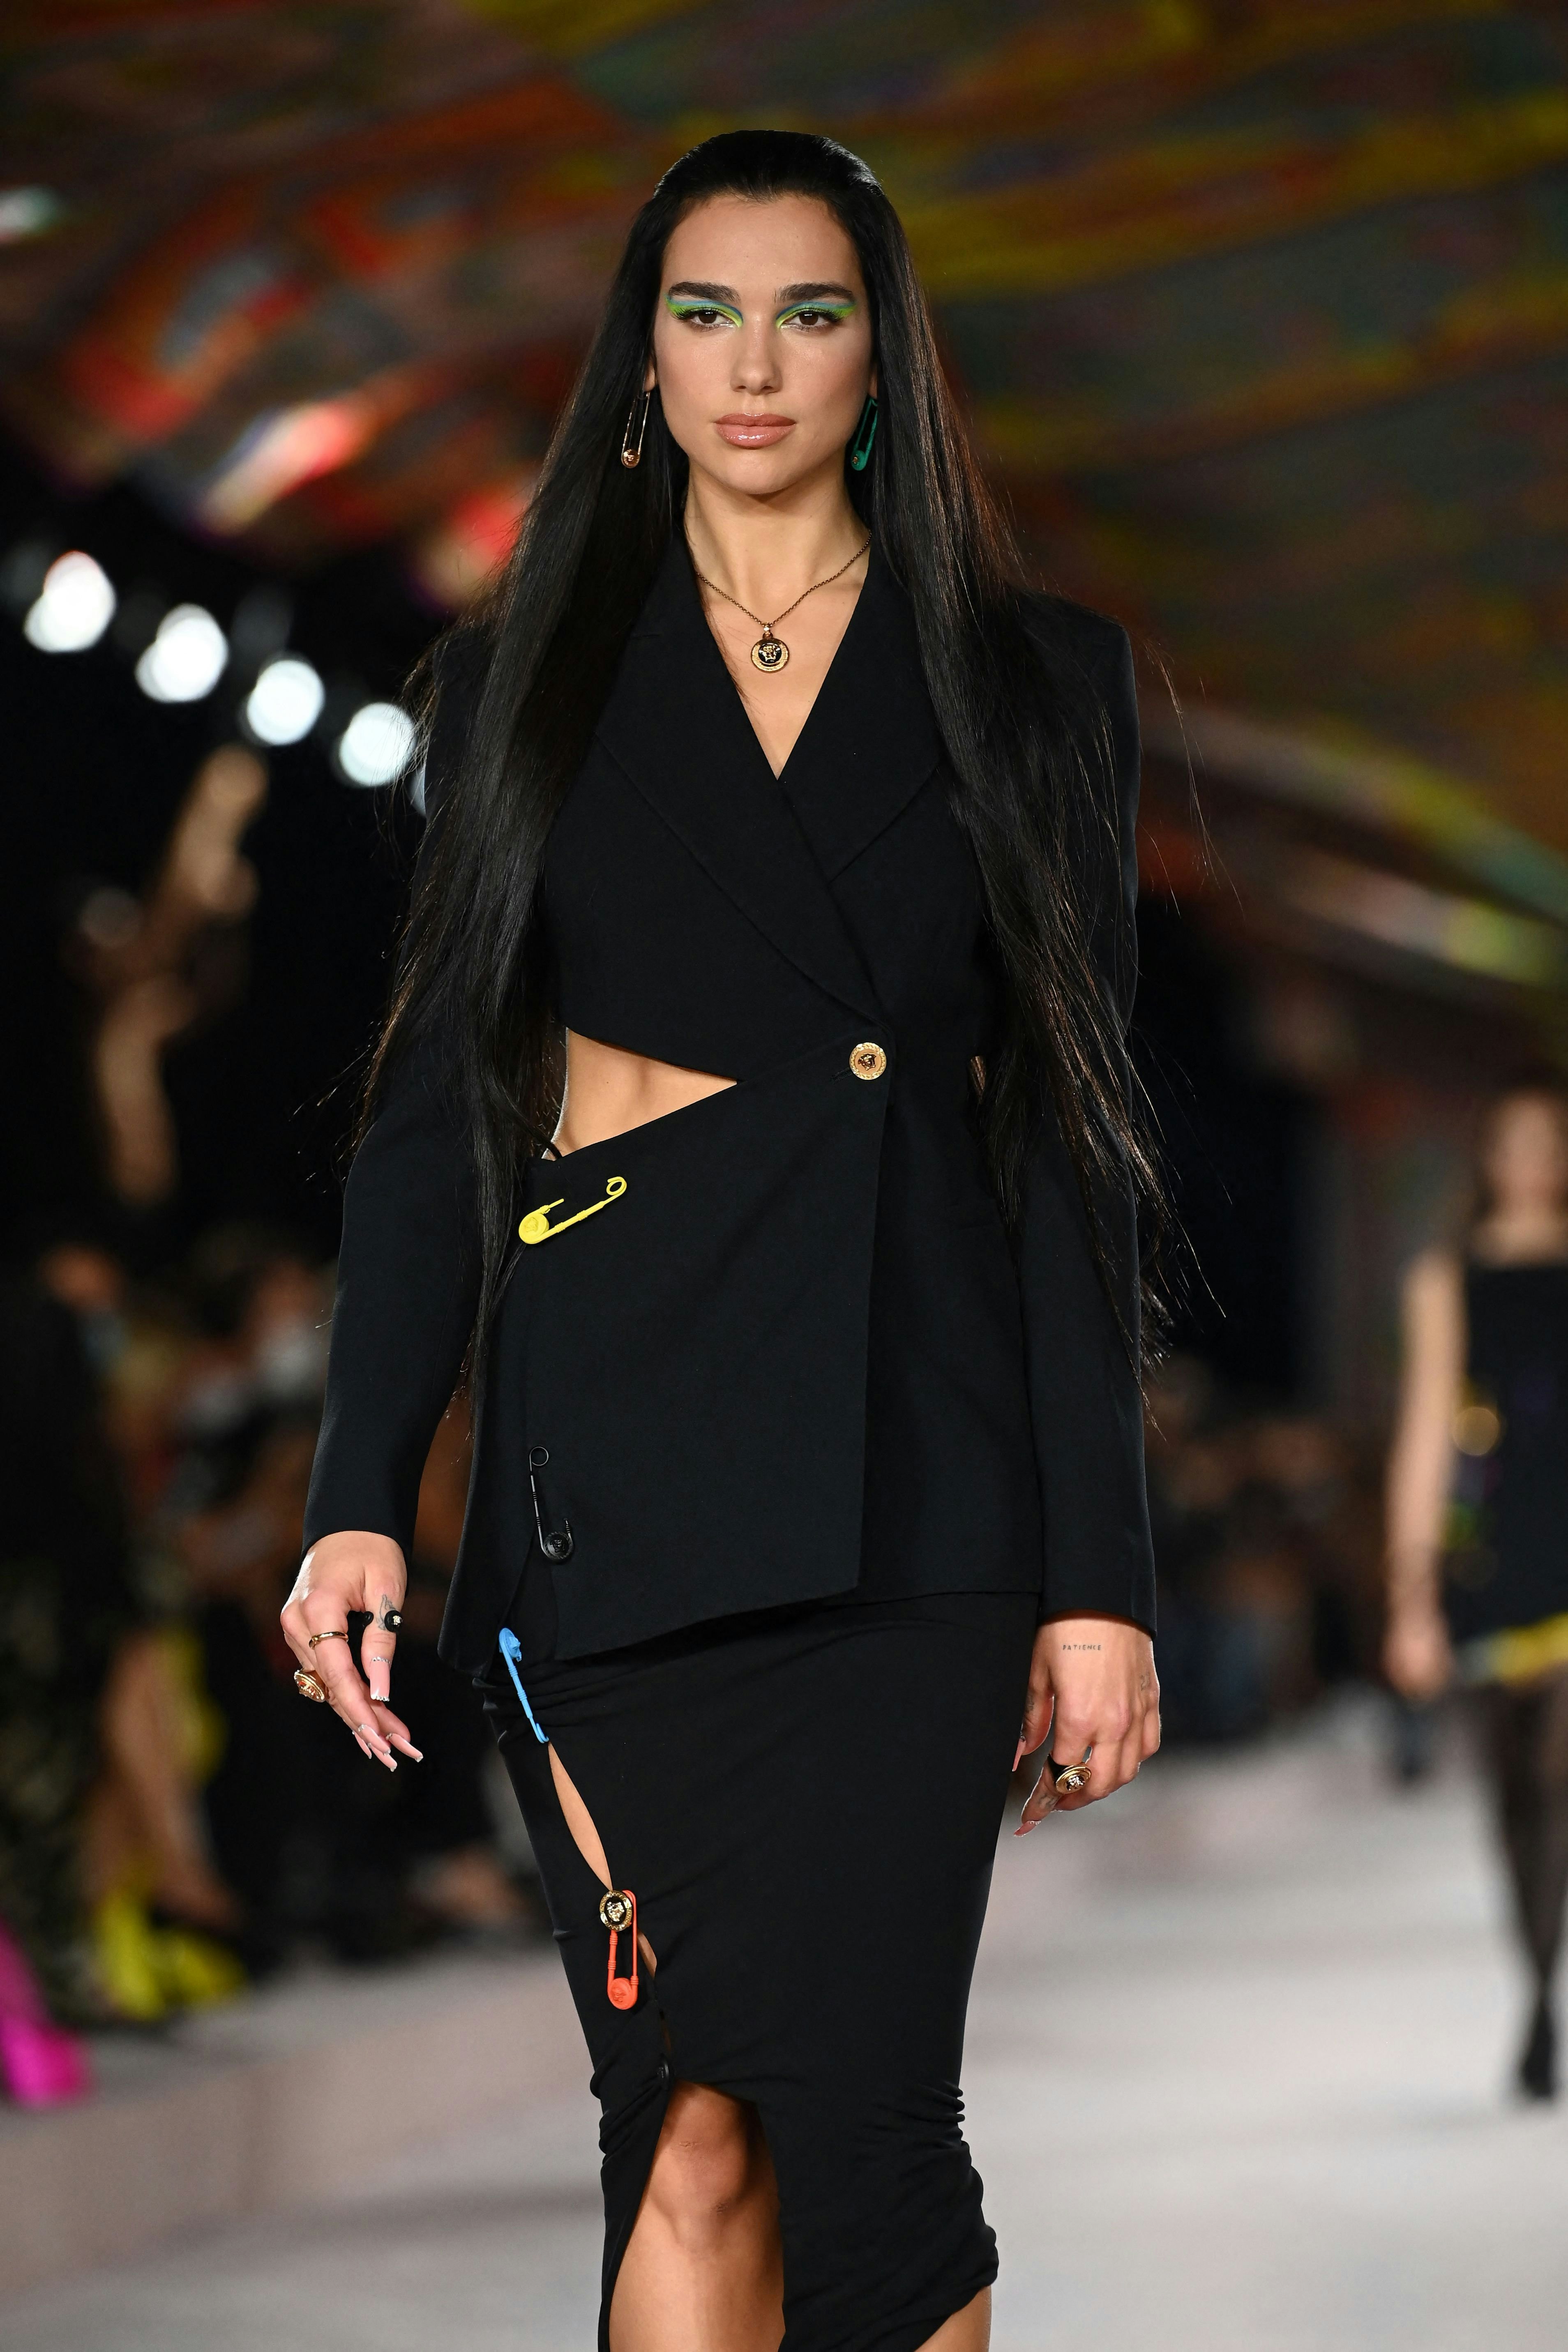 Dua Lipa Makes Her Runway Debut at Versace in a Safety Pin Dress